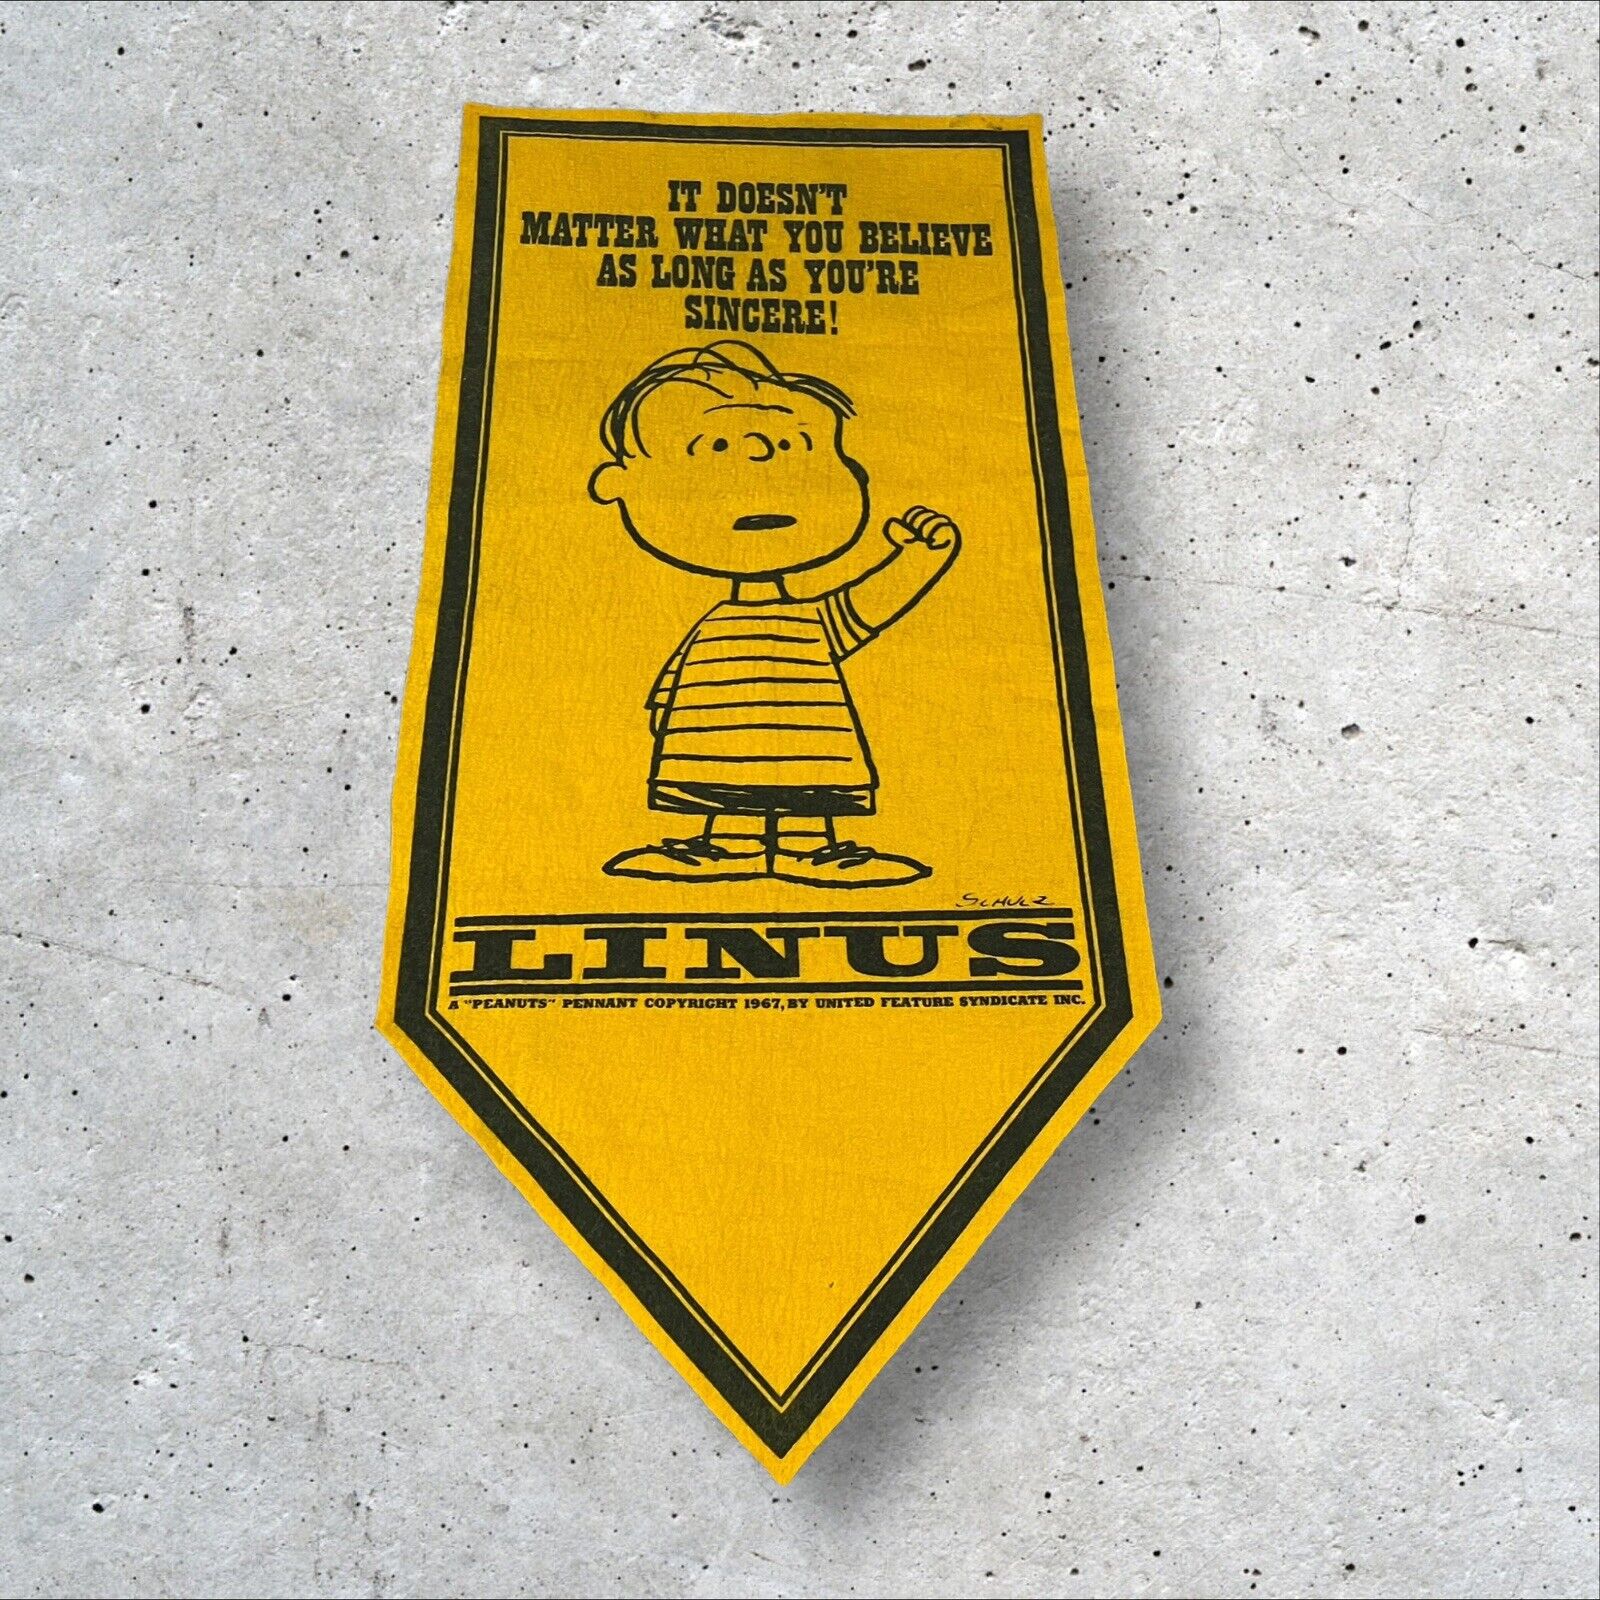 Vintage Peanuts Linus Banner Pennant 60s 70s It Doesn’t Matter What You Believe